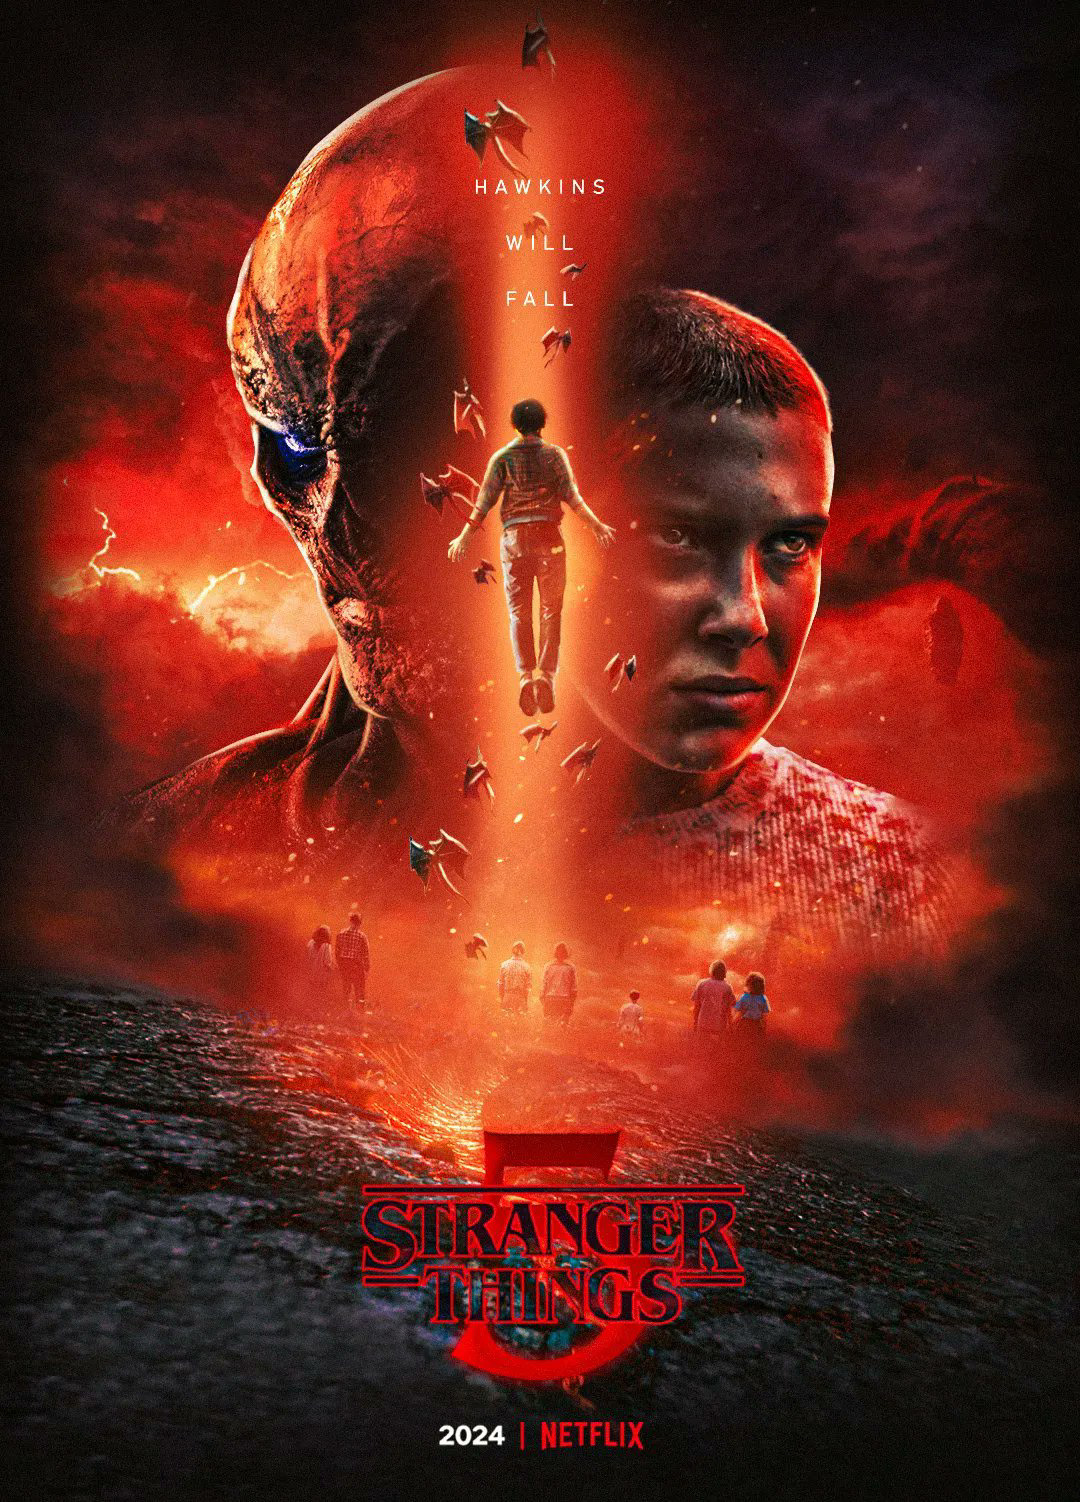 poster Stranger Things series Netflix will vecna eleven creatures fantasy characters